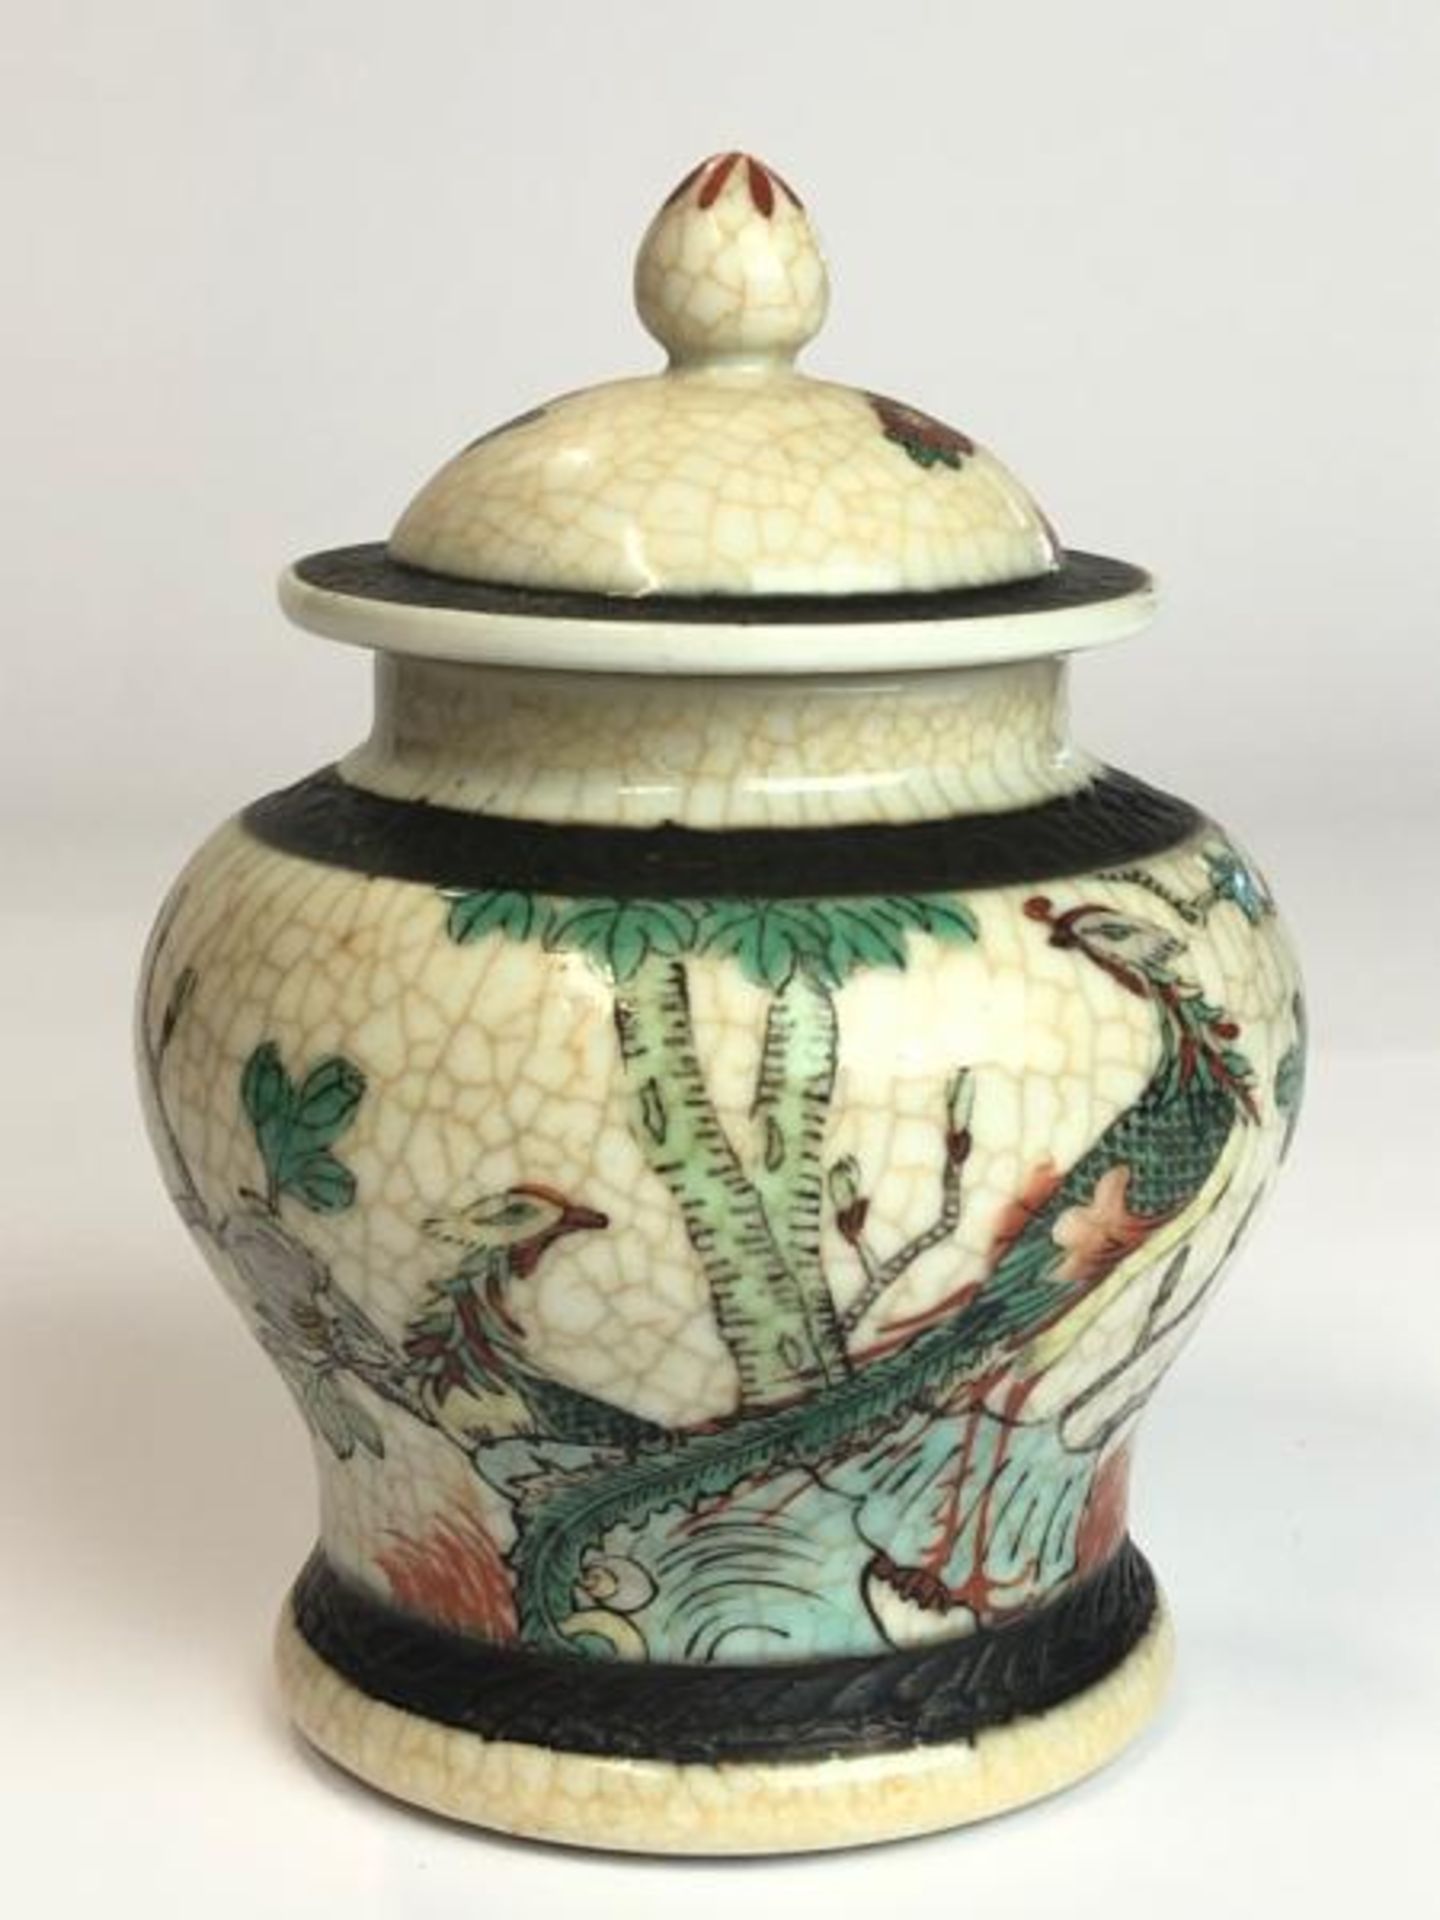 A vintage chinese crackle ware ginger jar with lid, 14cm high with a hand painted crackle ware bowl, - Image 2 of 8